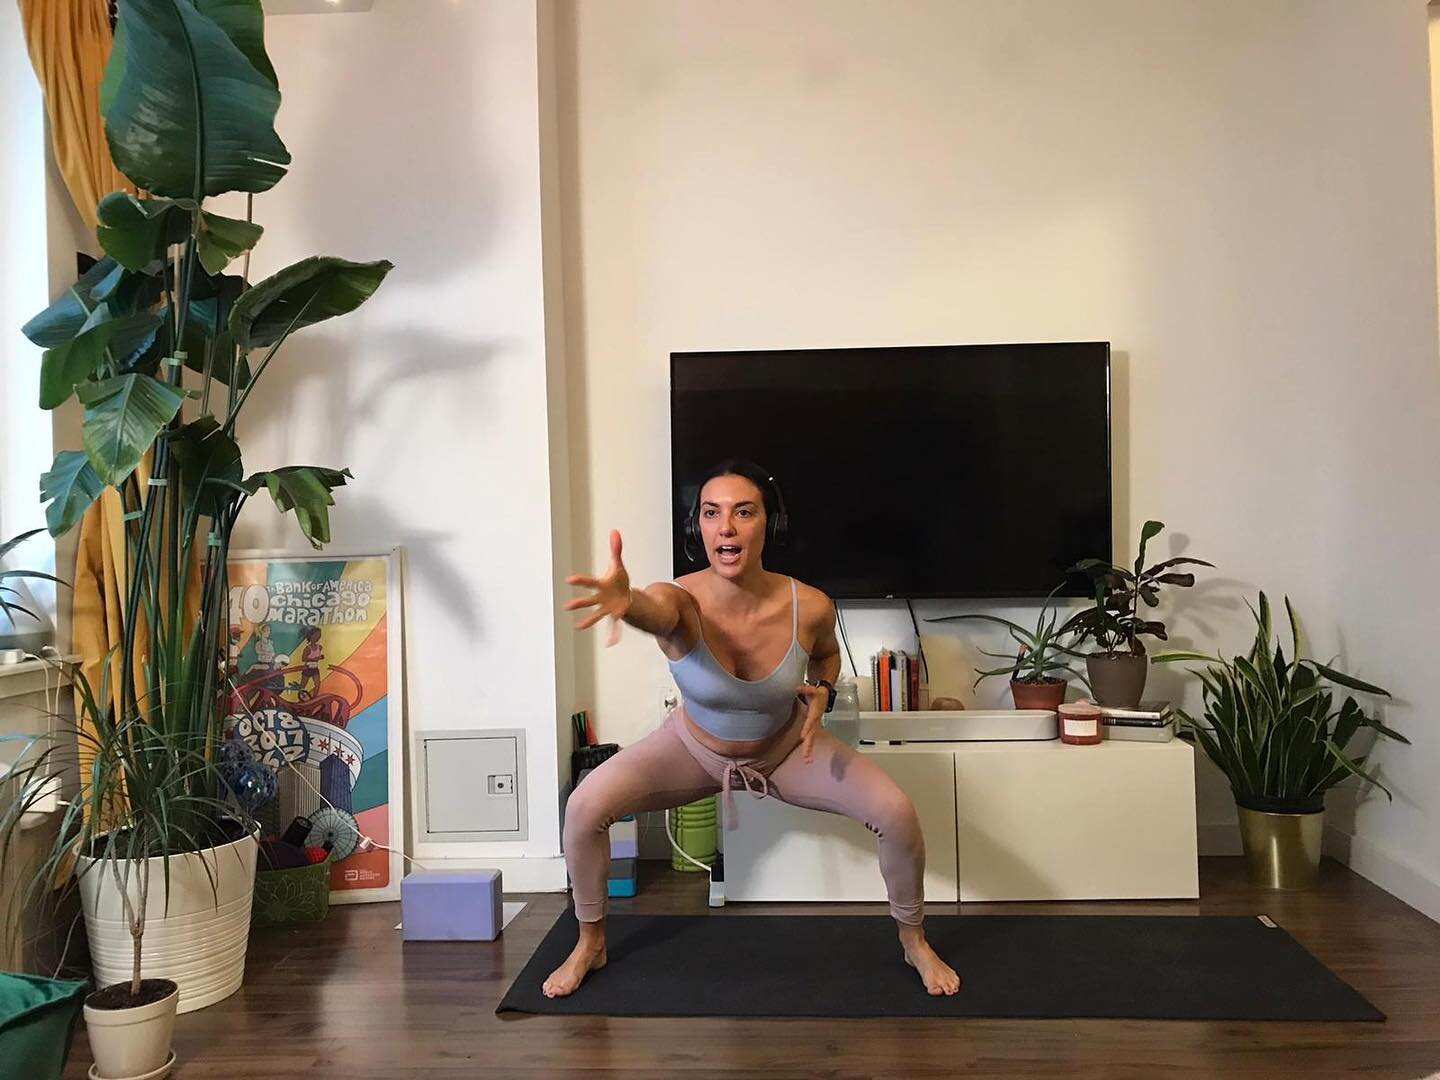 Reaching out to say Yoga is ON for tomorrow, Sunday. So if you&rsquo;re feeling the stiffness from your week (or bc classes were cancelled) this is your time to wiggle it all out and end your week right!

Also reaching out in excitement for Wekk 2 of